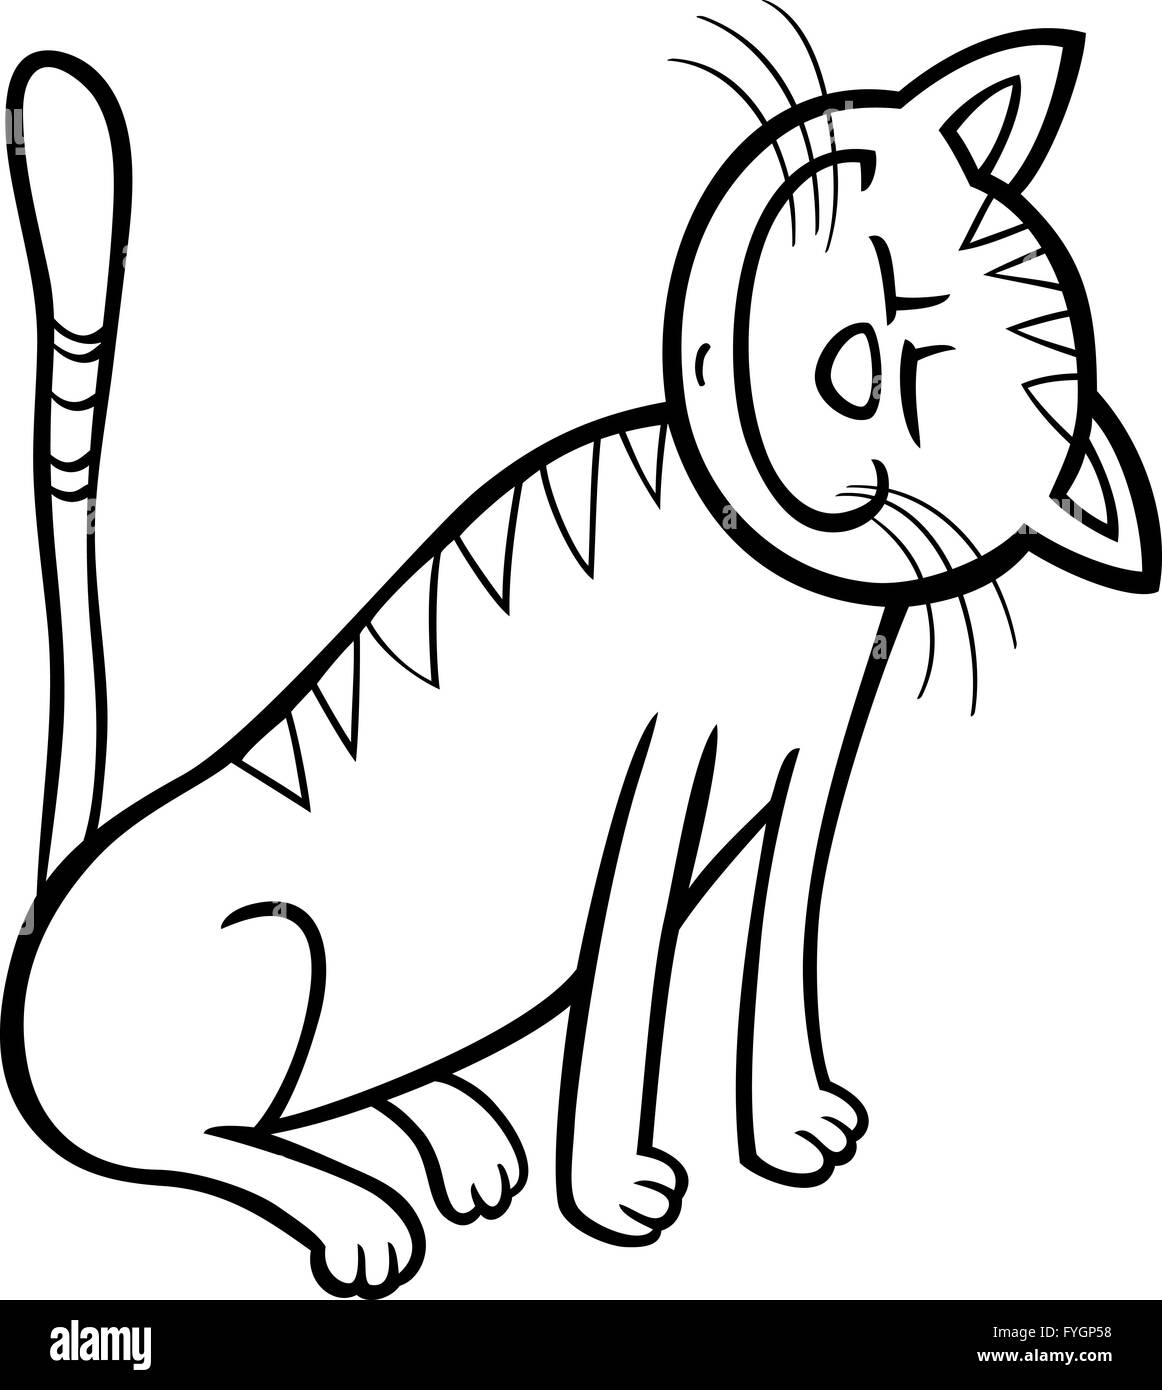 happy cat cartoon for coloring book Stock Photo